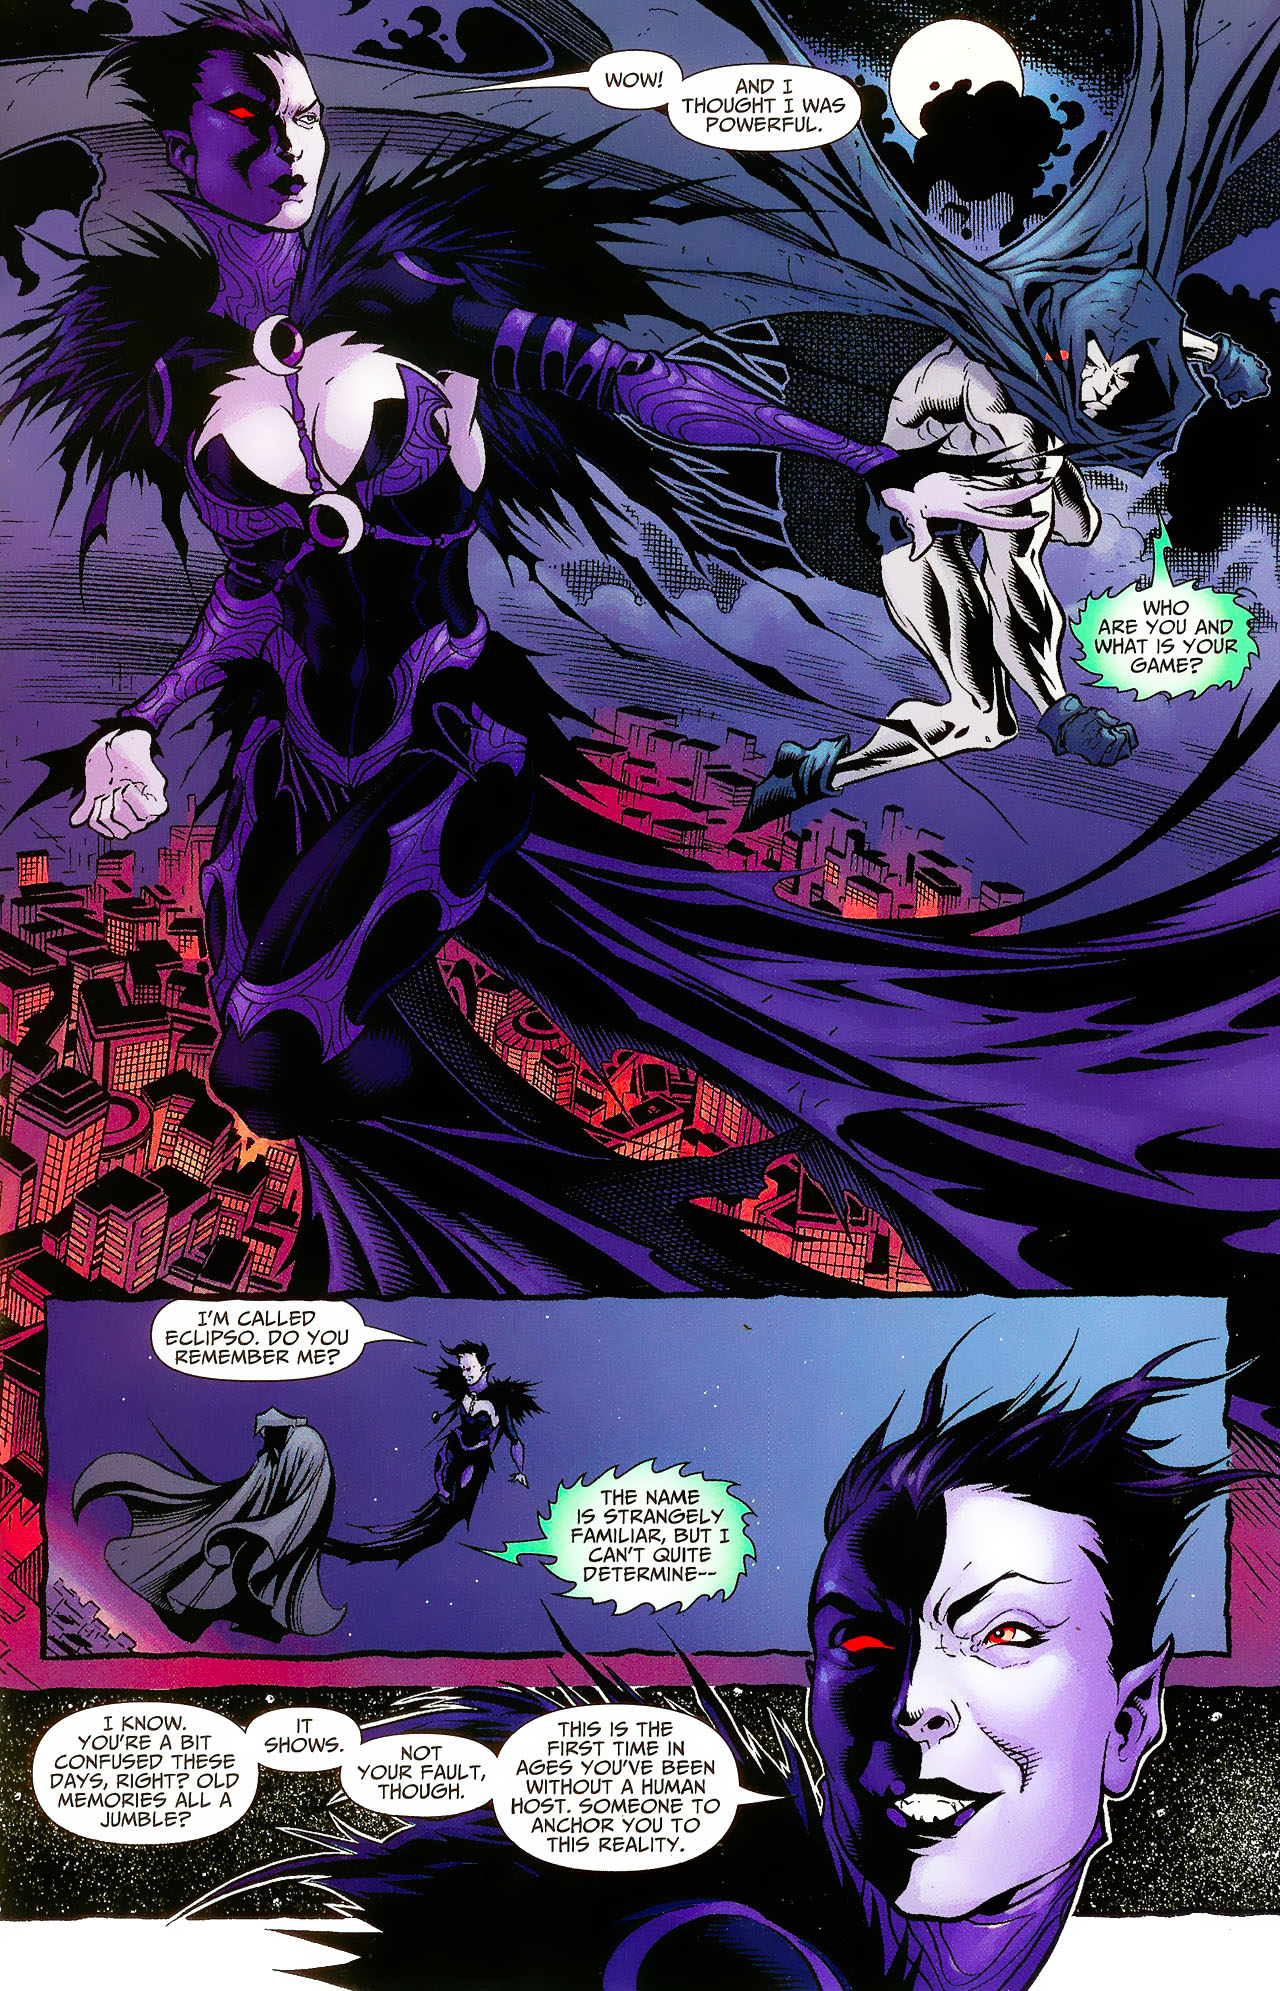 Amazing Eclipso Pictures & Backgrounds